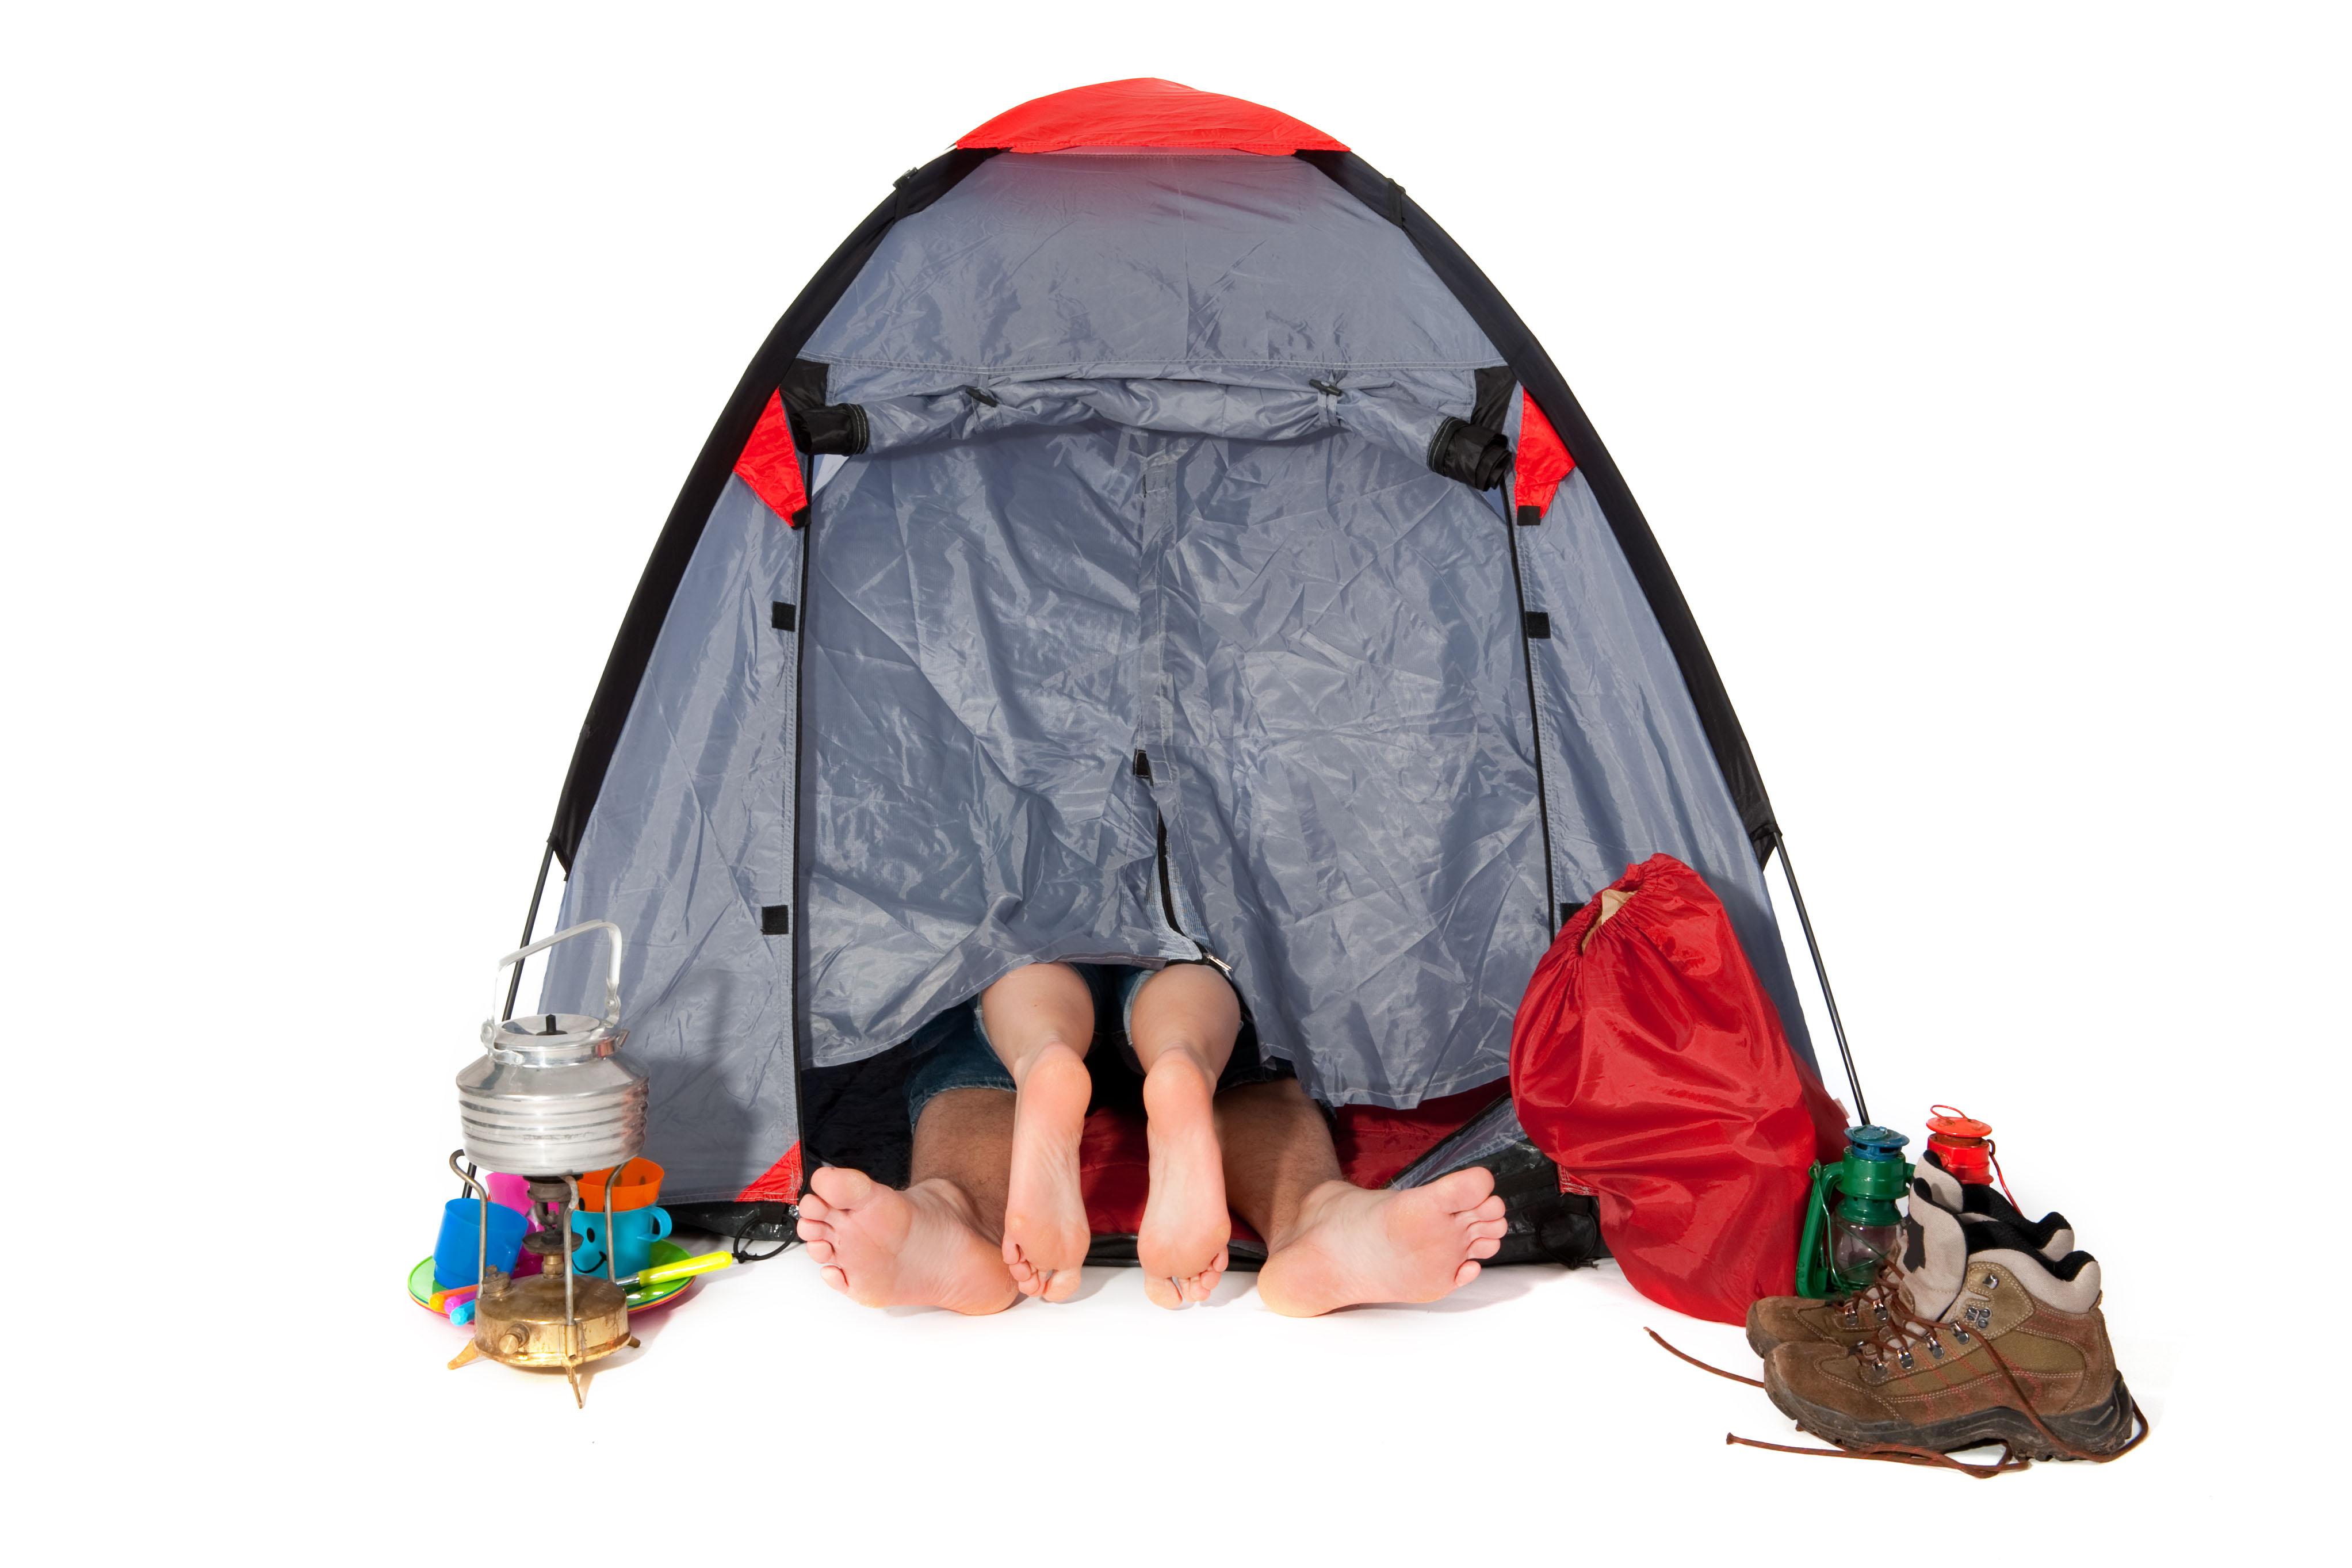 donelle leasure recommends Sex In A Tent